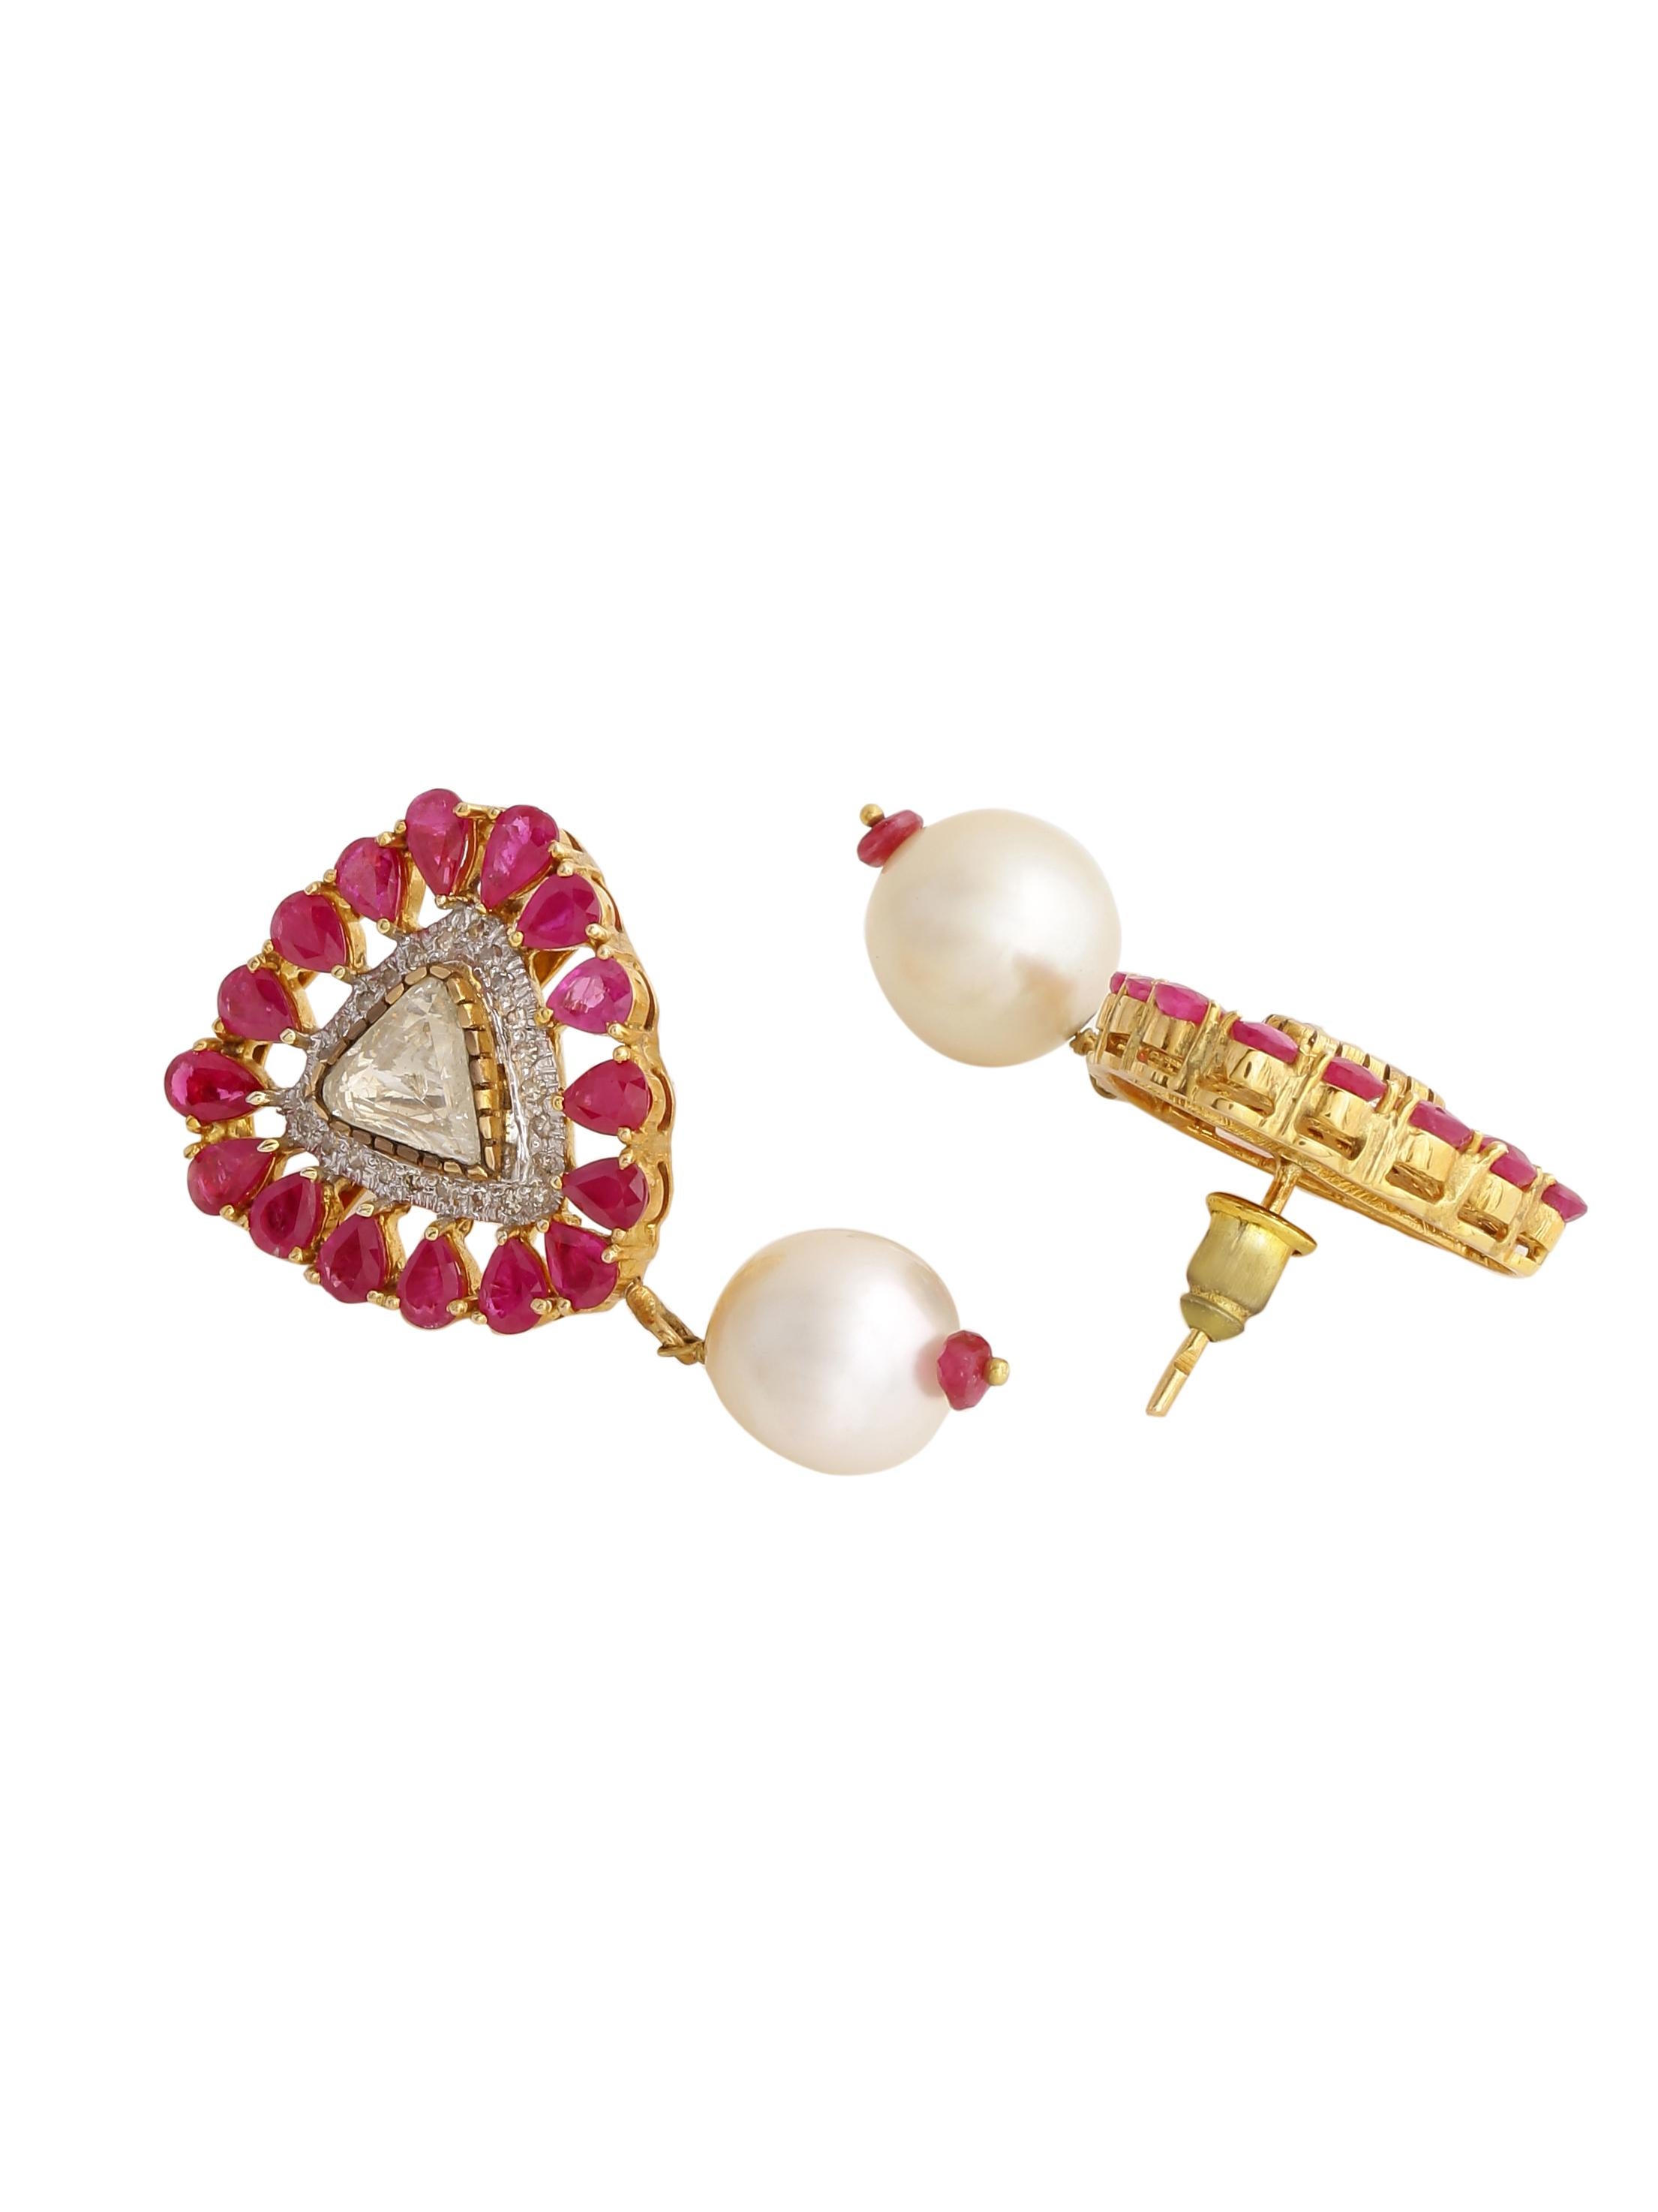 Ruby and 1.90 Carats Diamond Earring Pair with a Pearl Hanging Made in 18K Gold For Sale 2